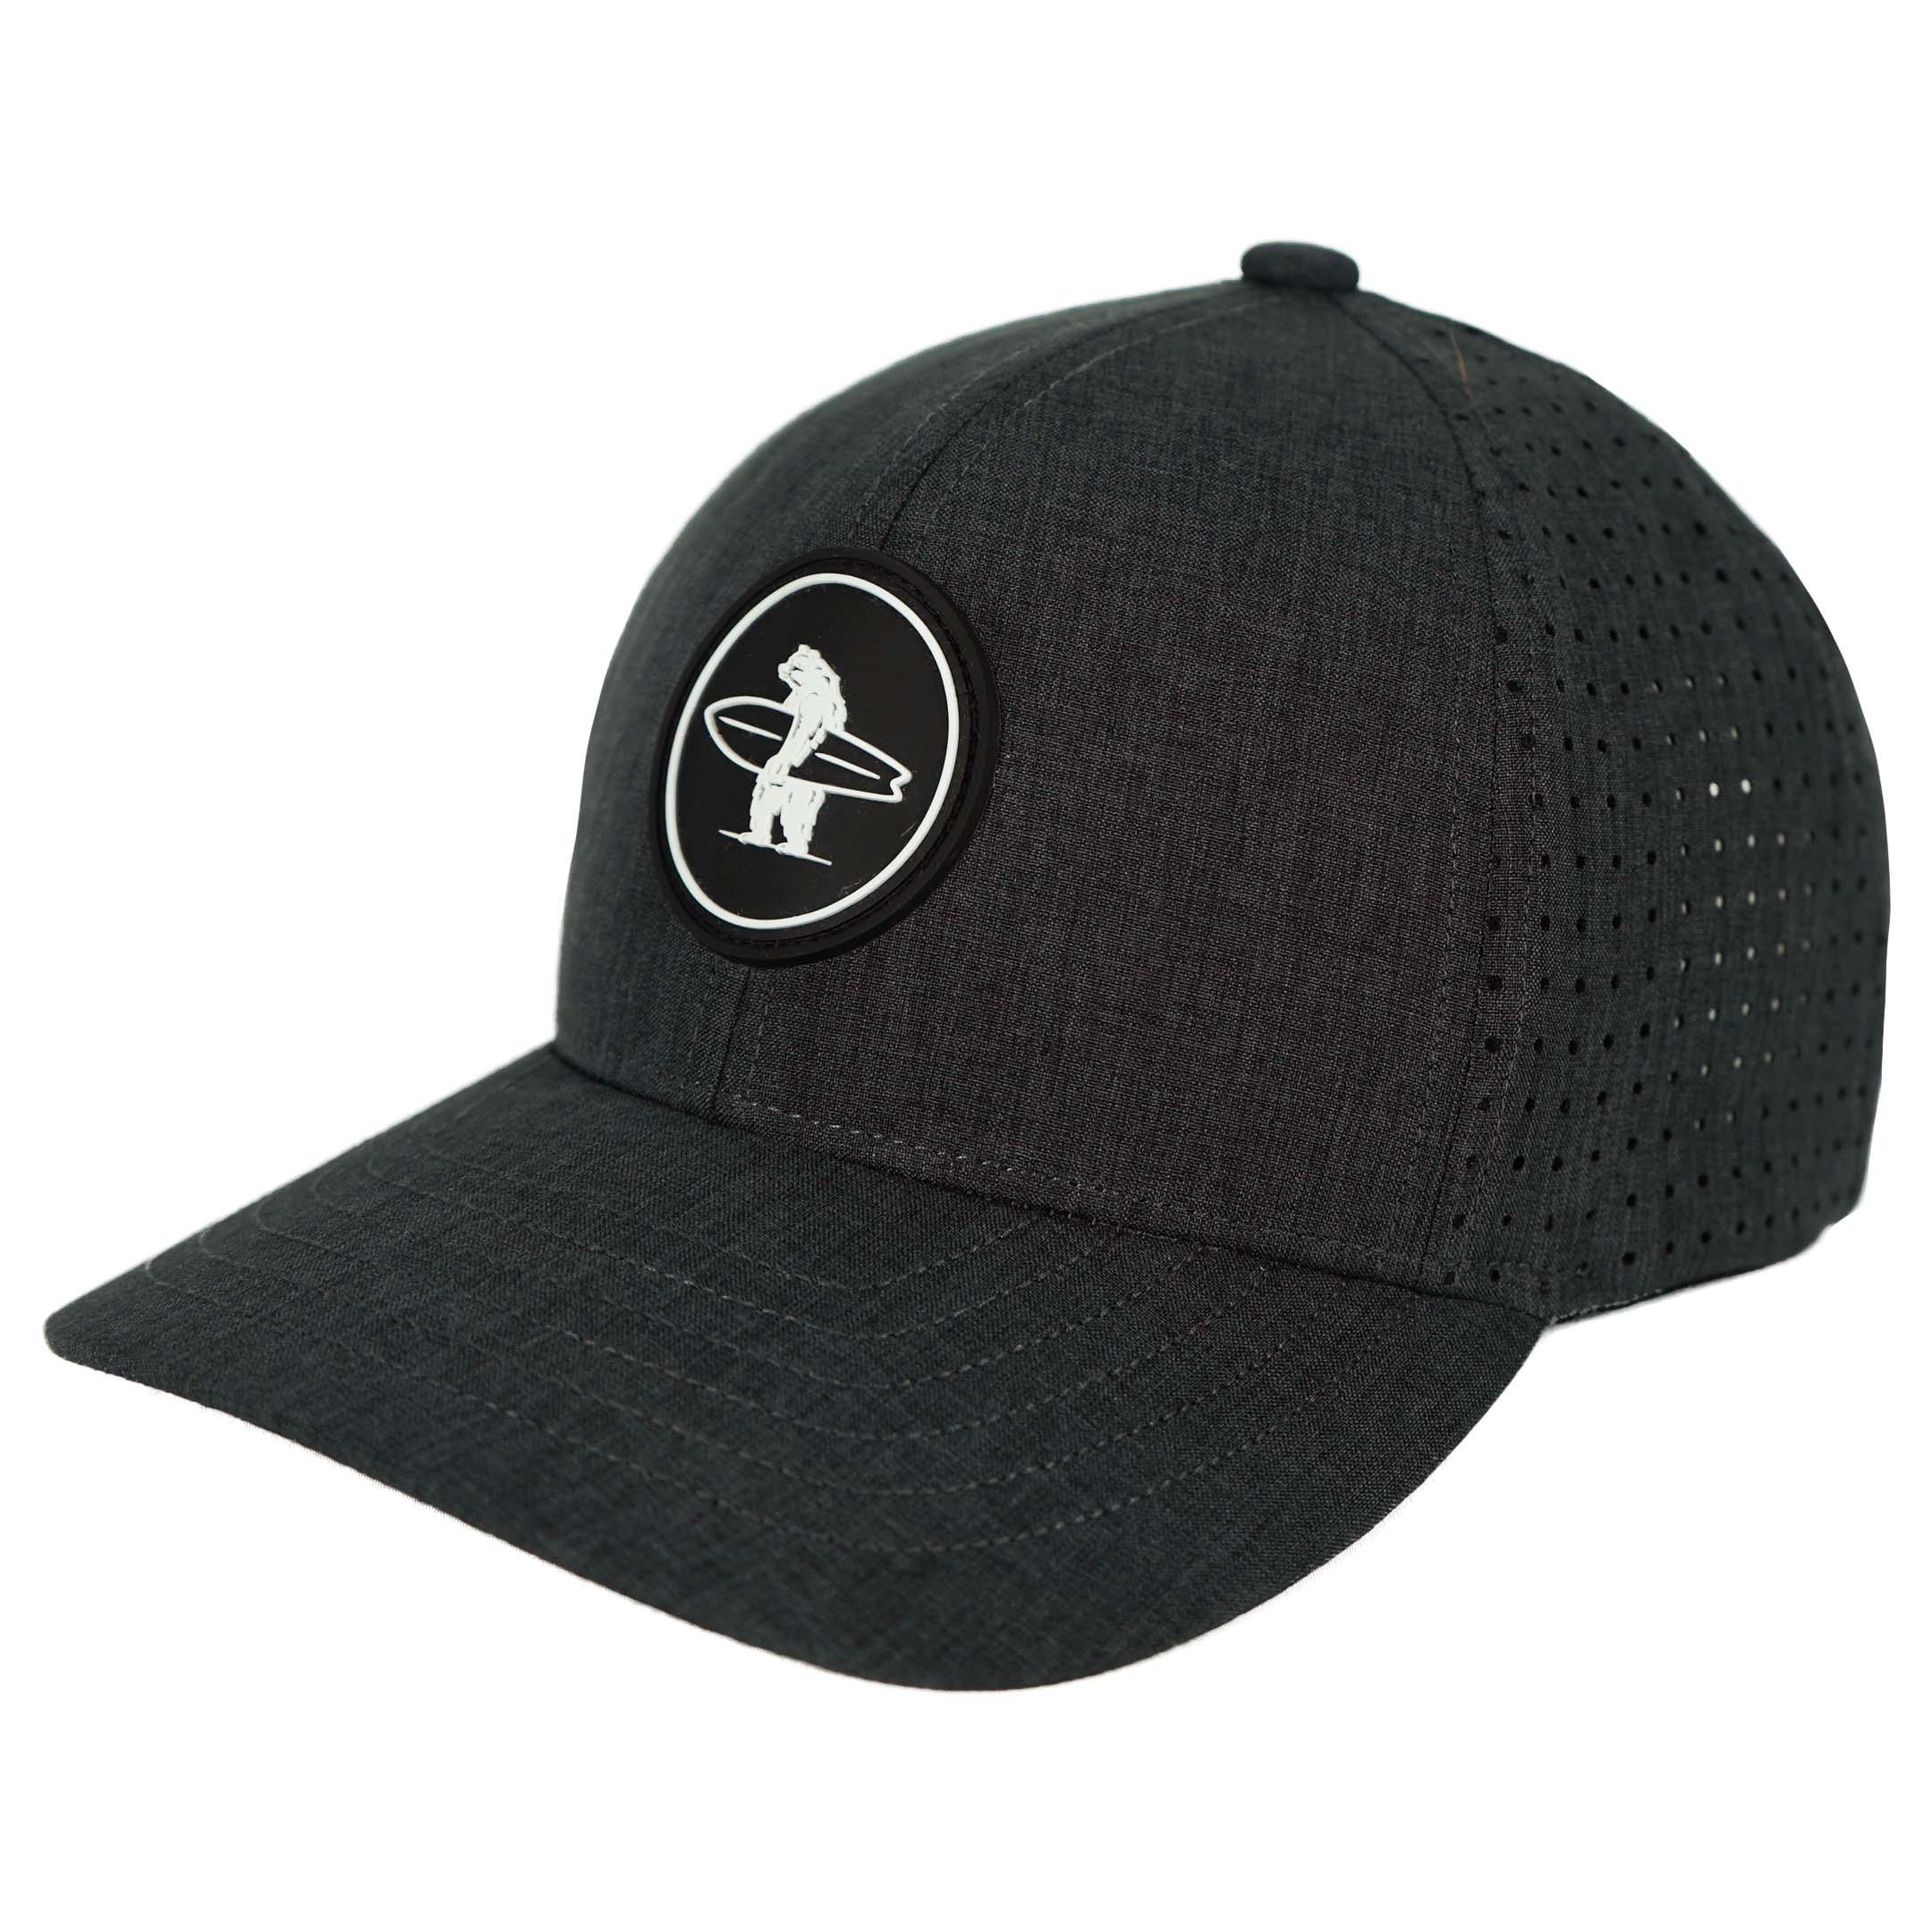 Diego Performance Hat in Charcoal 